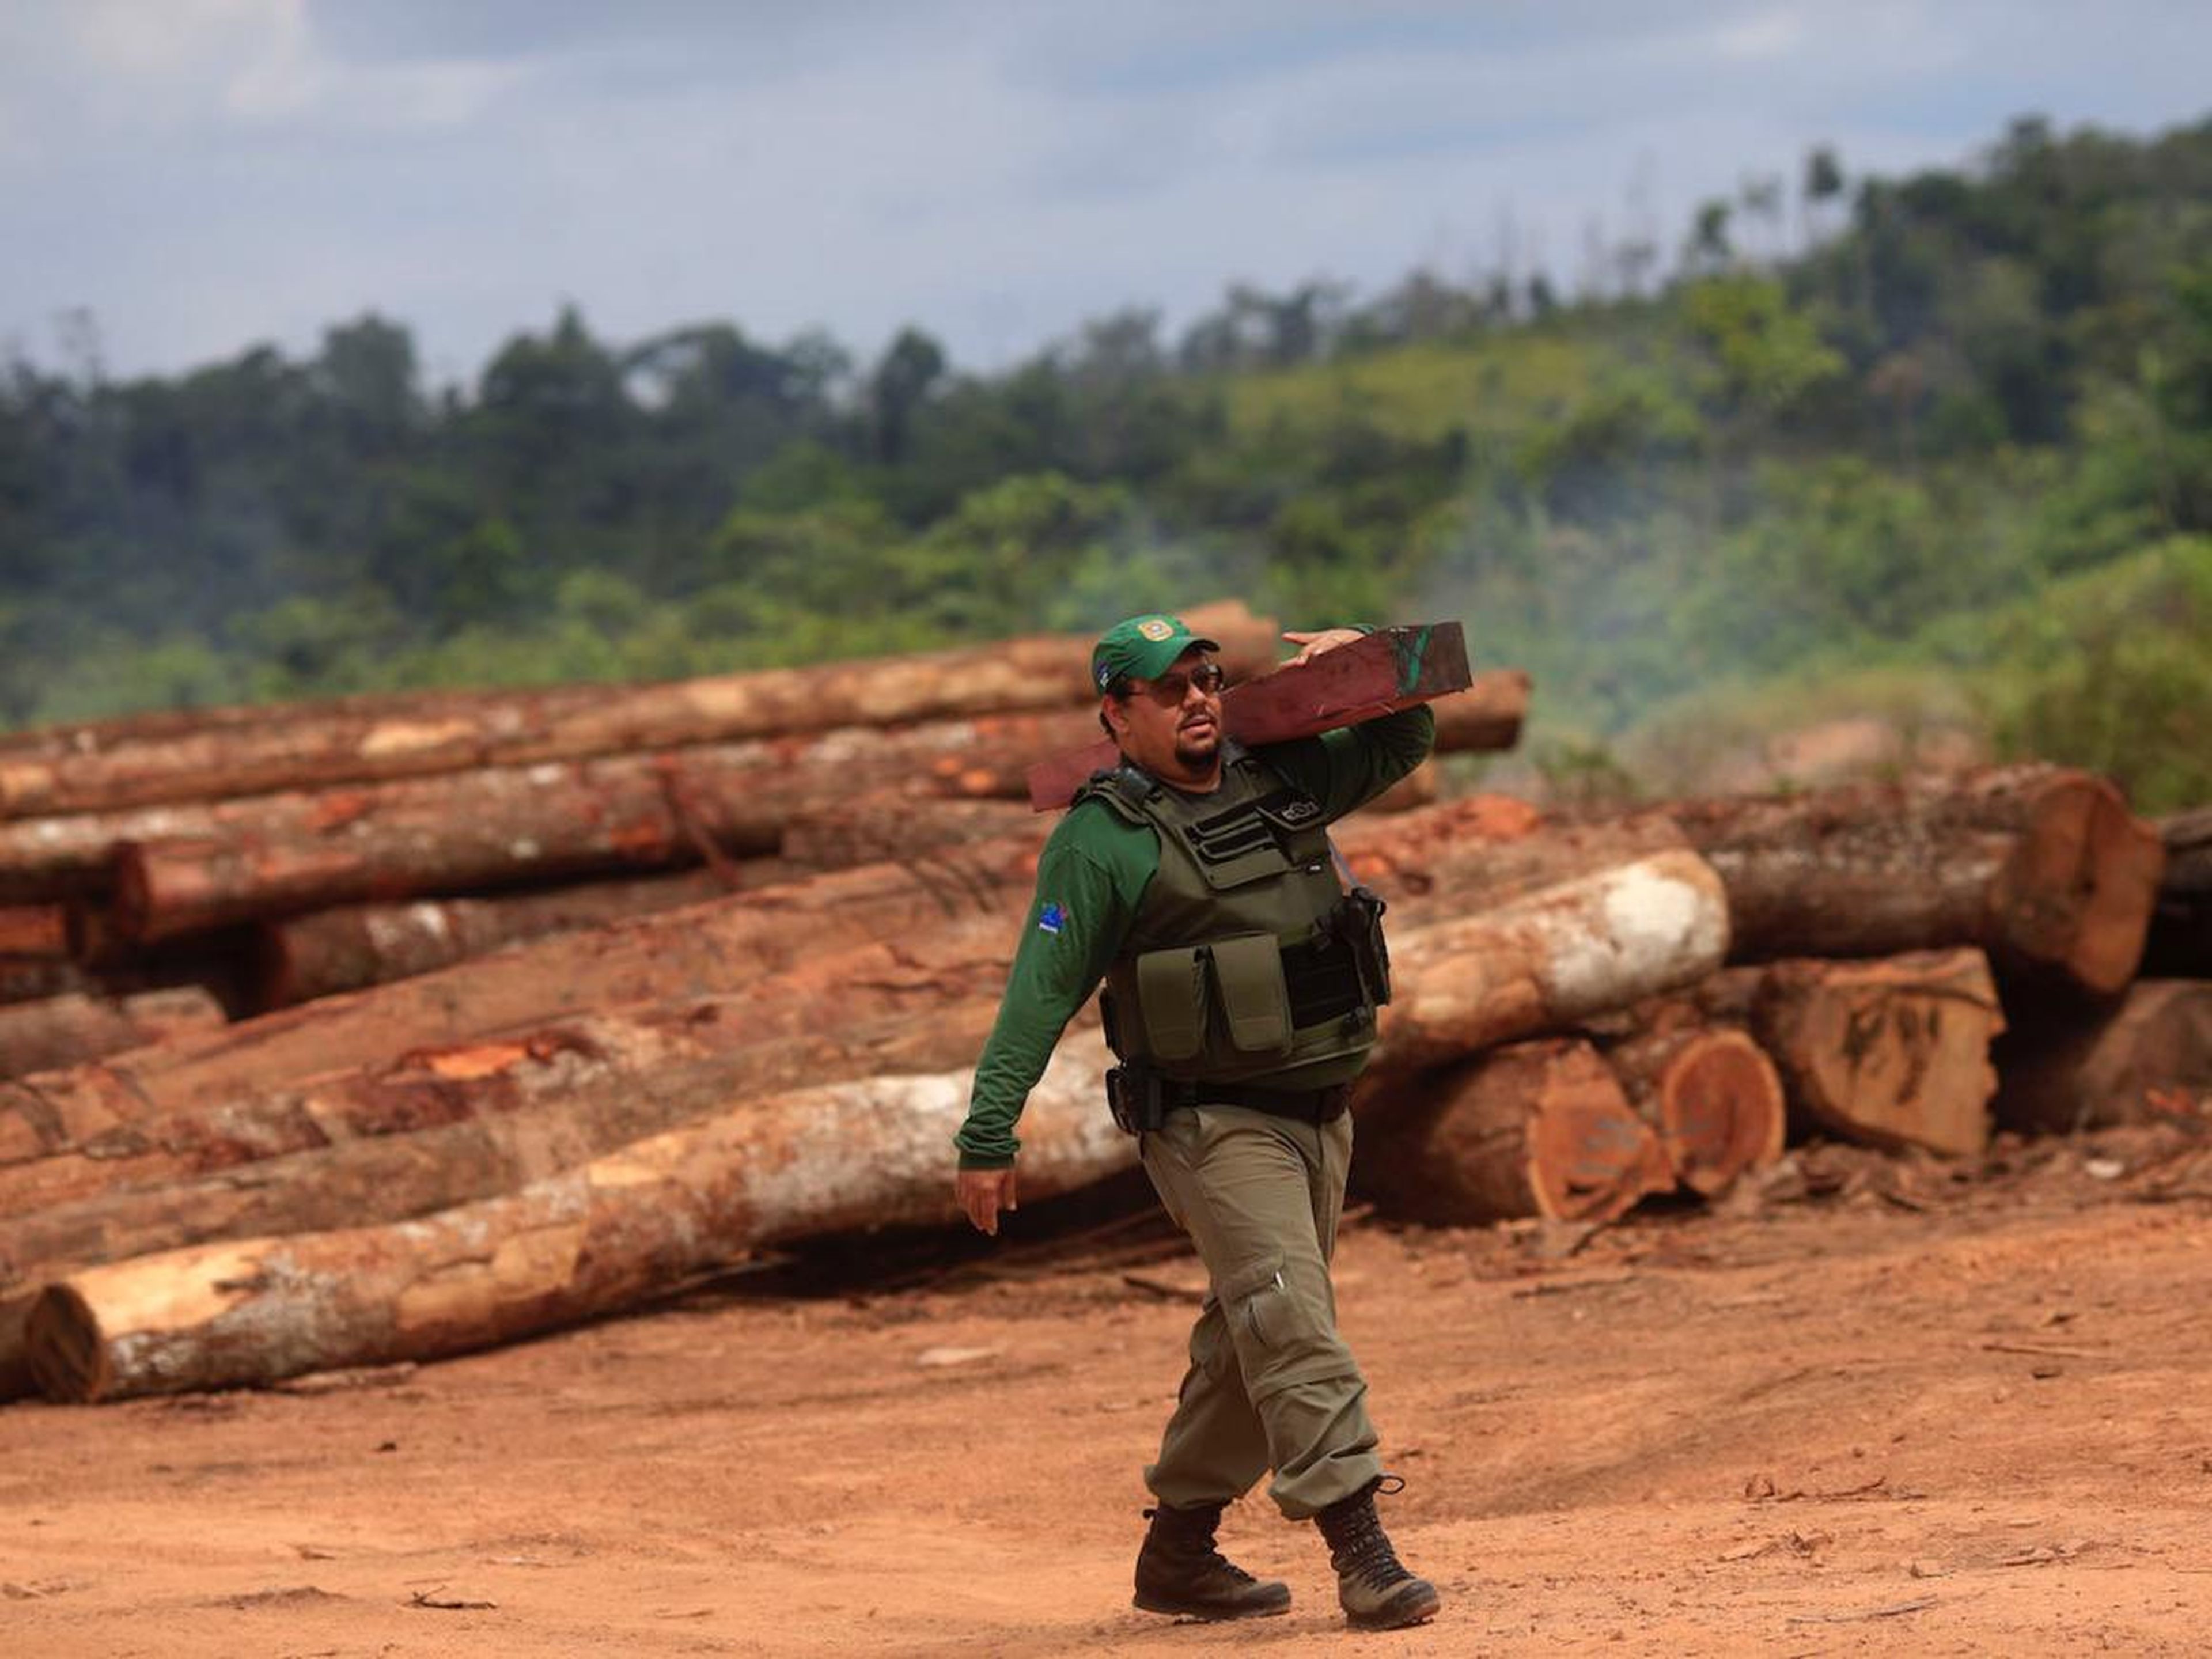 Agent Alex Lacerda of Brazil's Institute of Environment and Renewable Natural Resources carries a sample of wood that was confiscated at an illegal sawmill.